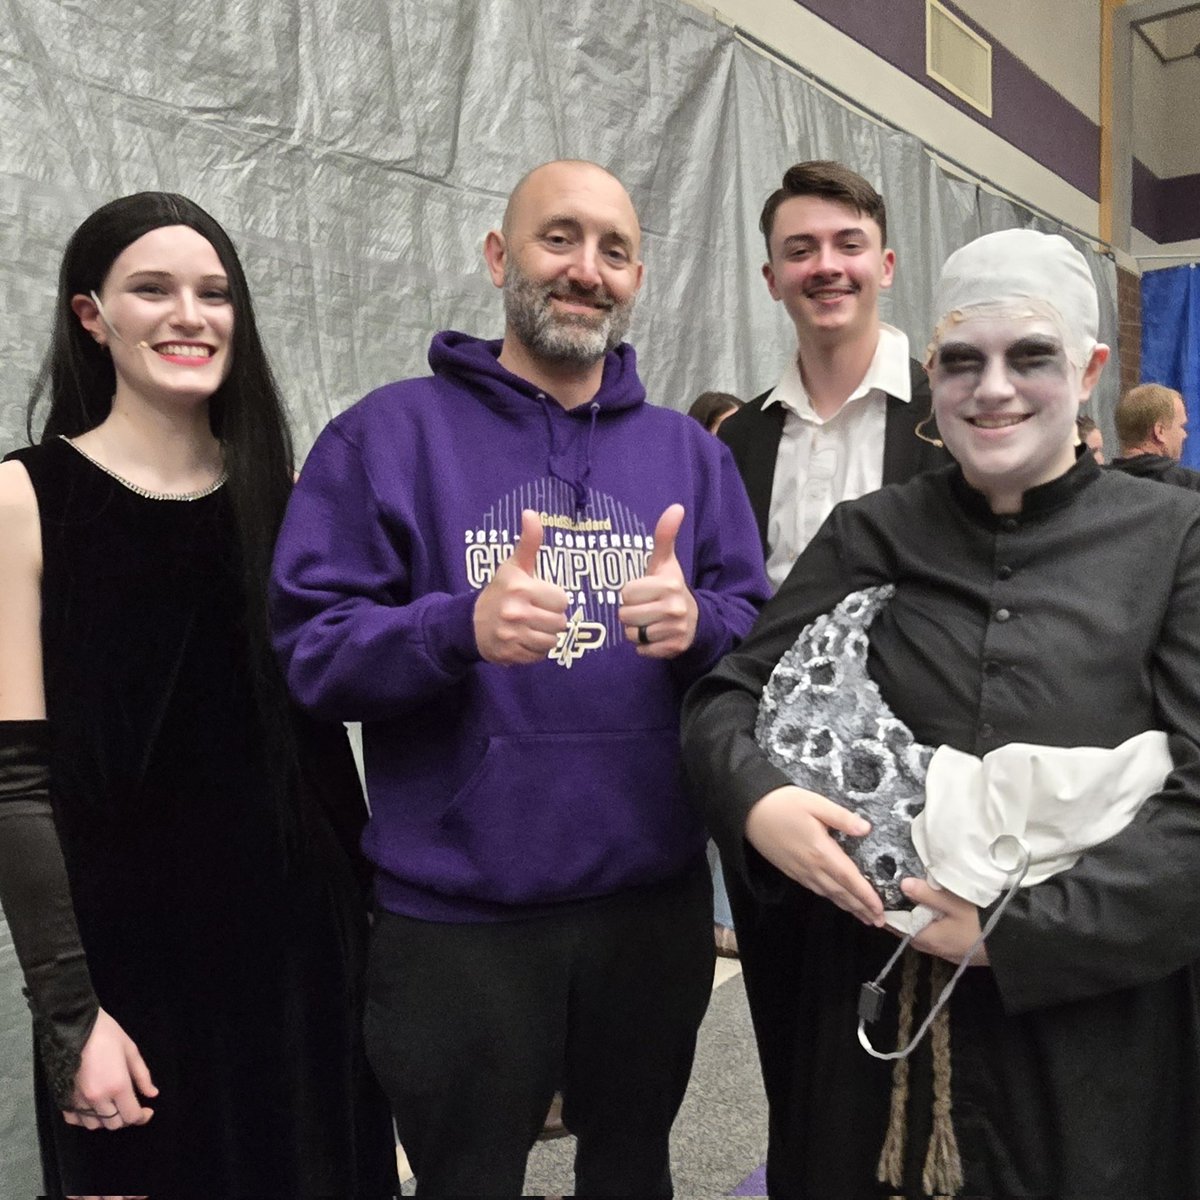 Looking for something to do this weekend? Check out Uncle Fester, Gomez, Morticia, and the rest of the family in The Addams Family: A New Musical Comedy at Pectonica High School. Coach Heisler gives it two thumbs up! 👍👍